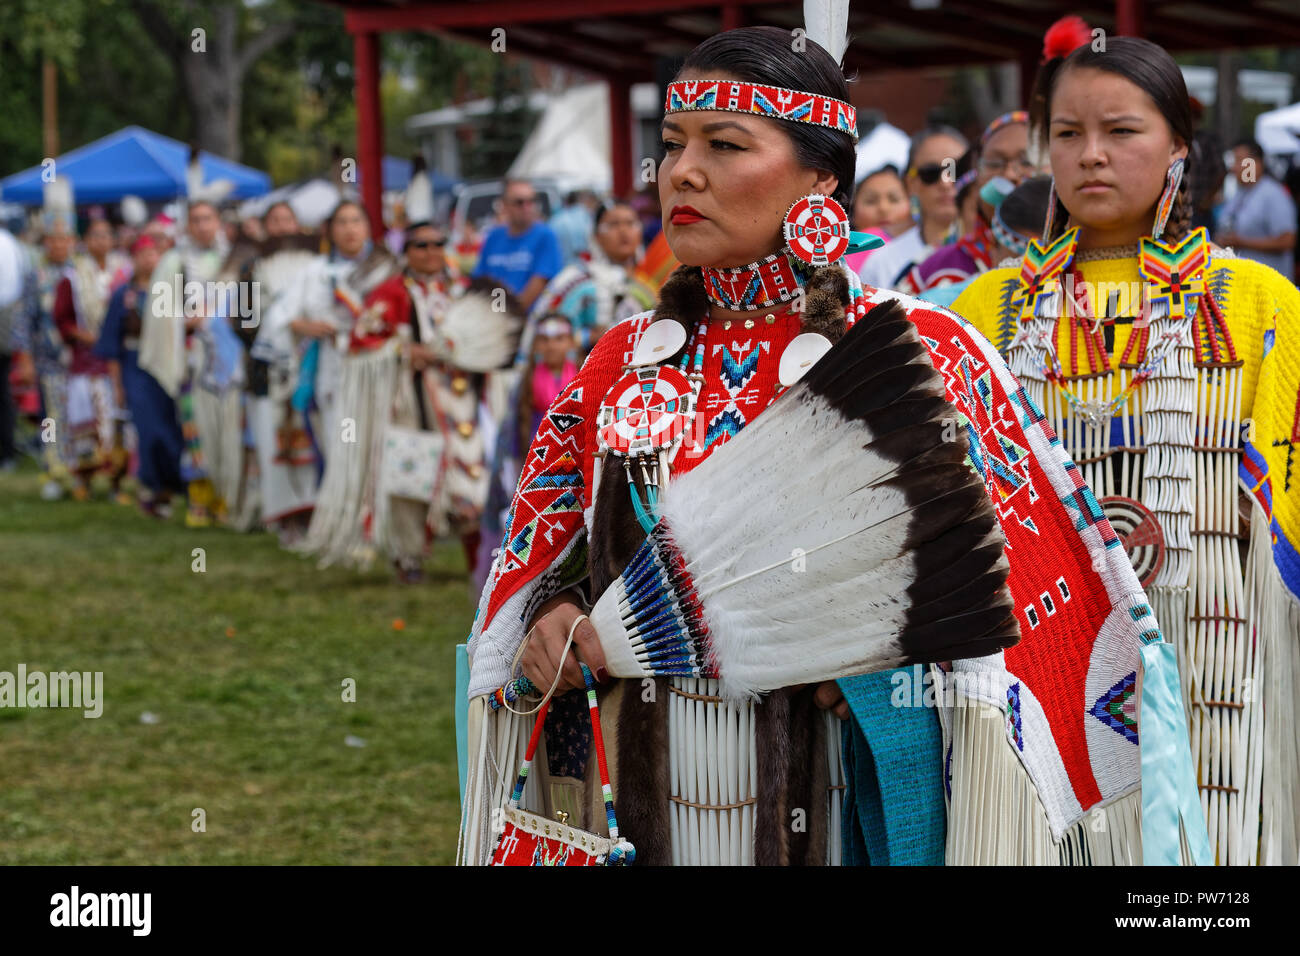 BISMARK, NORTH DAKOTA, September 9, 2018 : Women dancers of the 49th annual United Tribes Pow Wow, one large outdoor event that gathers more than 900  Stock Photo